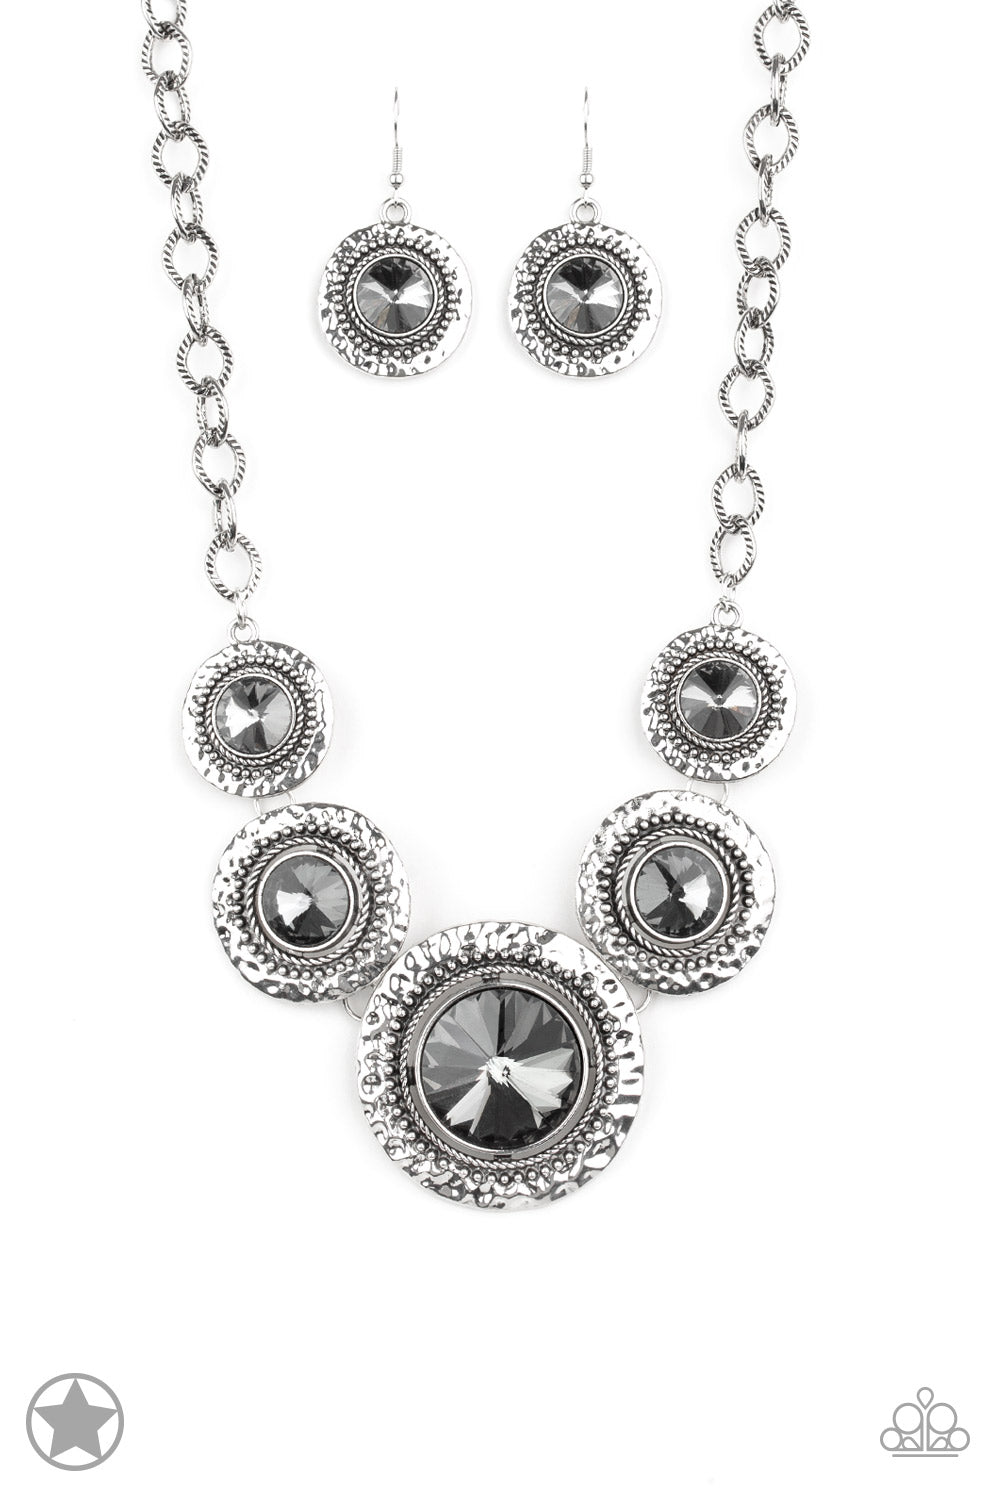 Global Glamour - Silver - Paparazzi Accessories